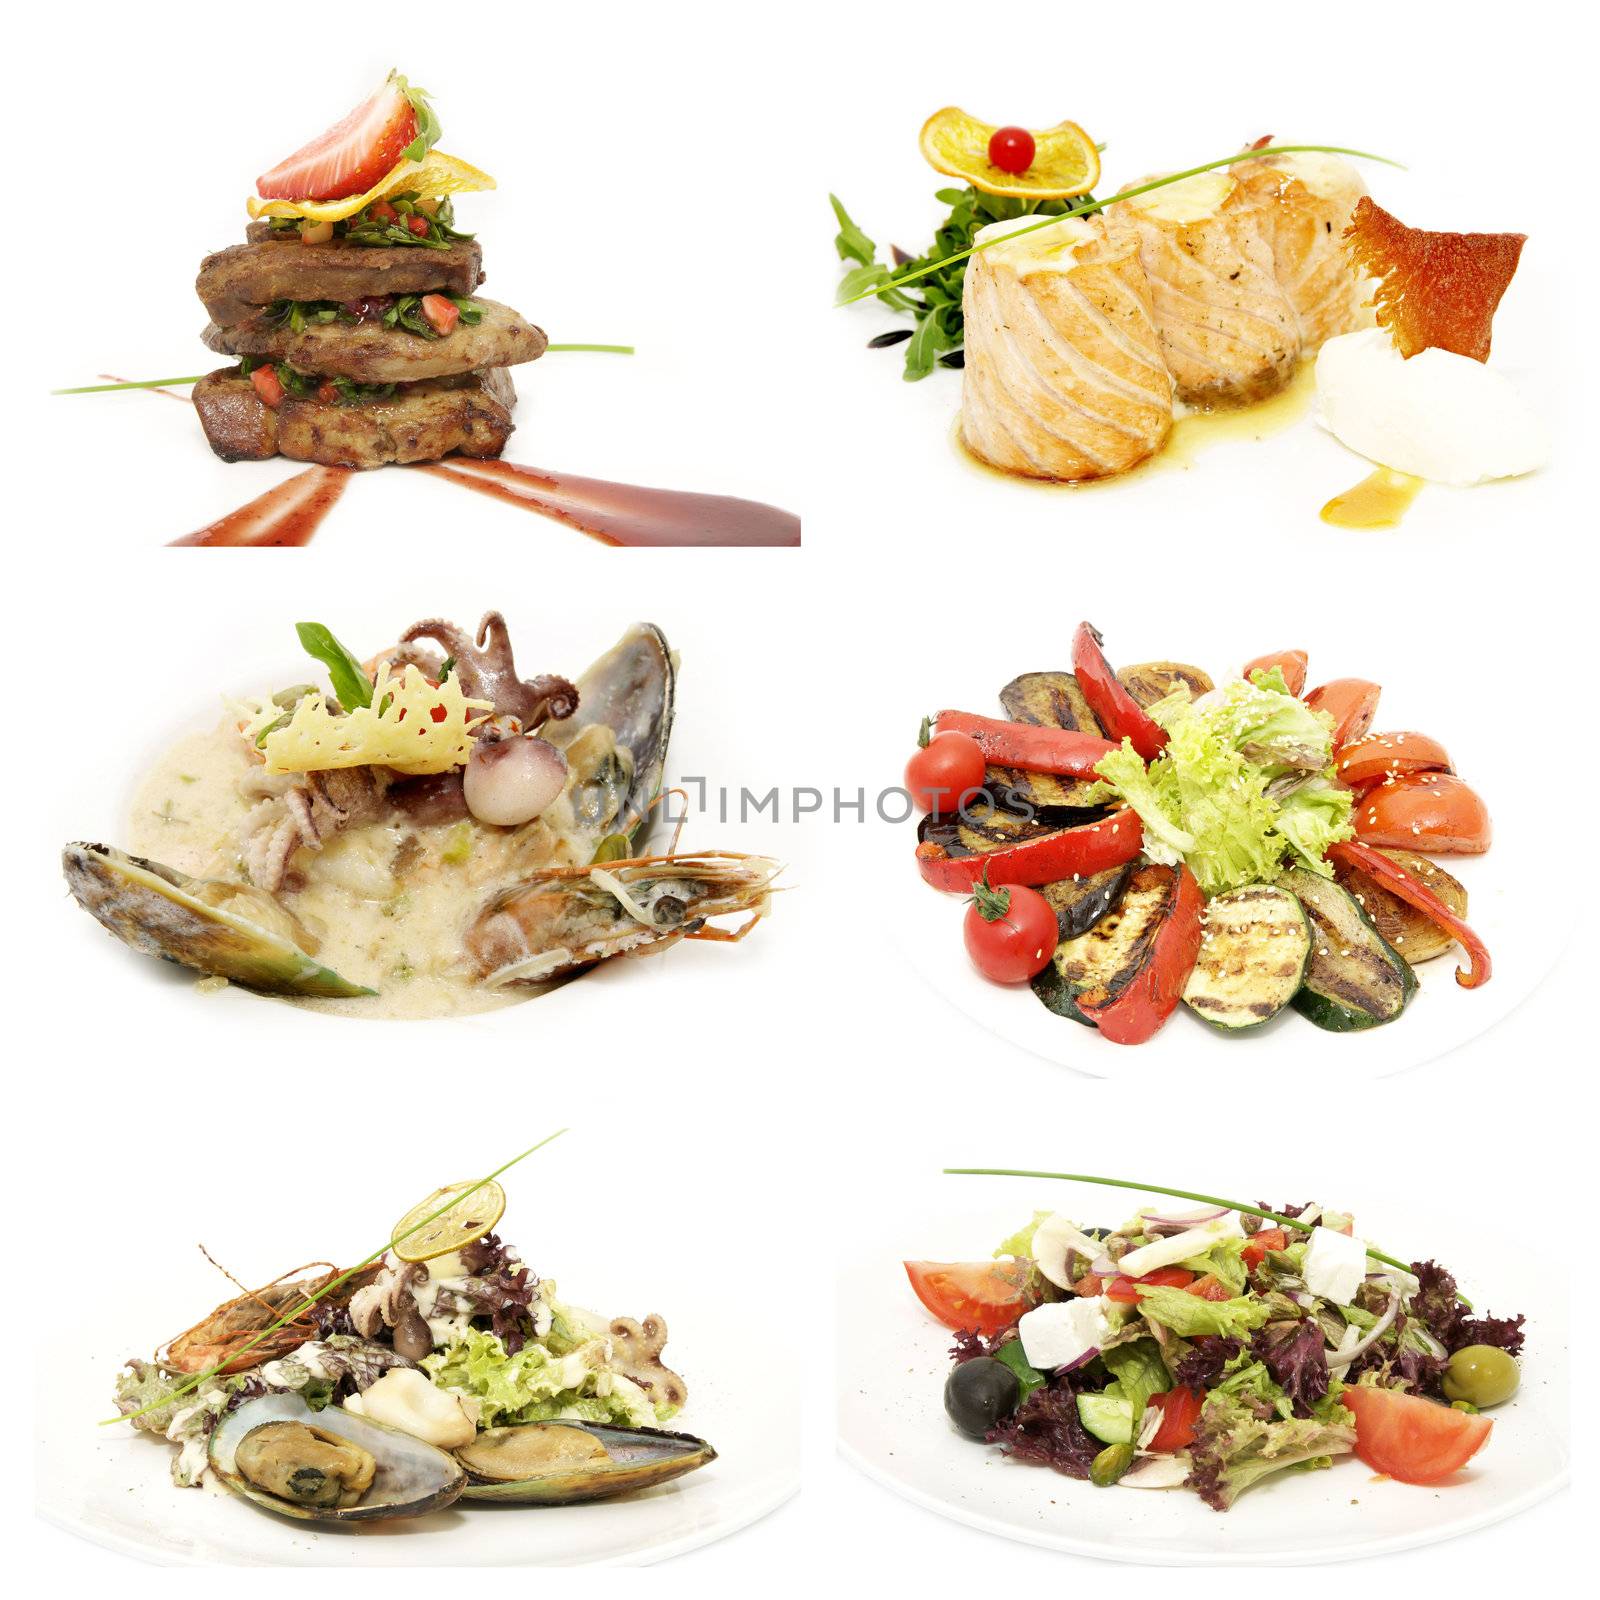 salads with vegetables and seafood in a restaurant